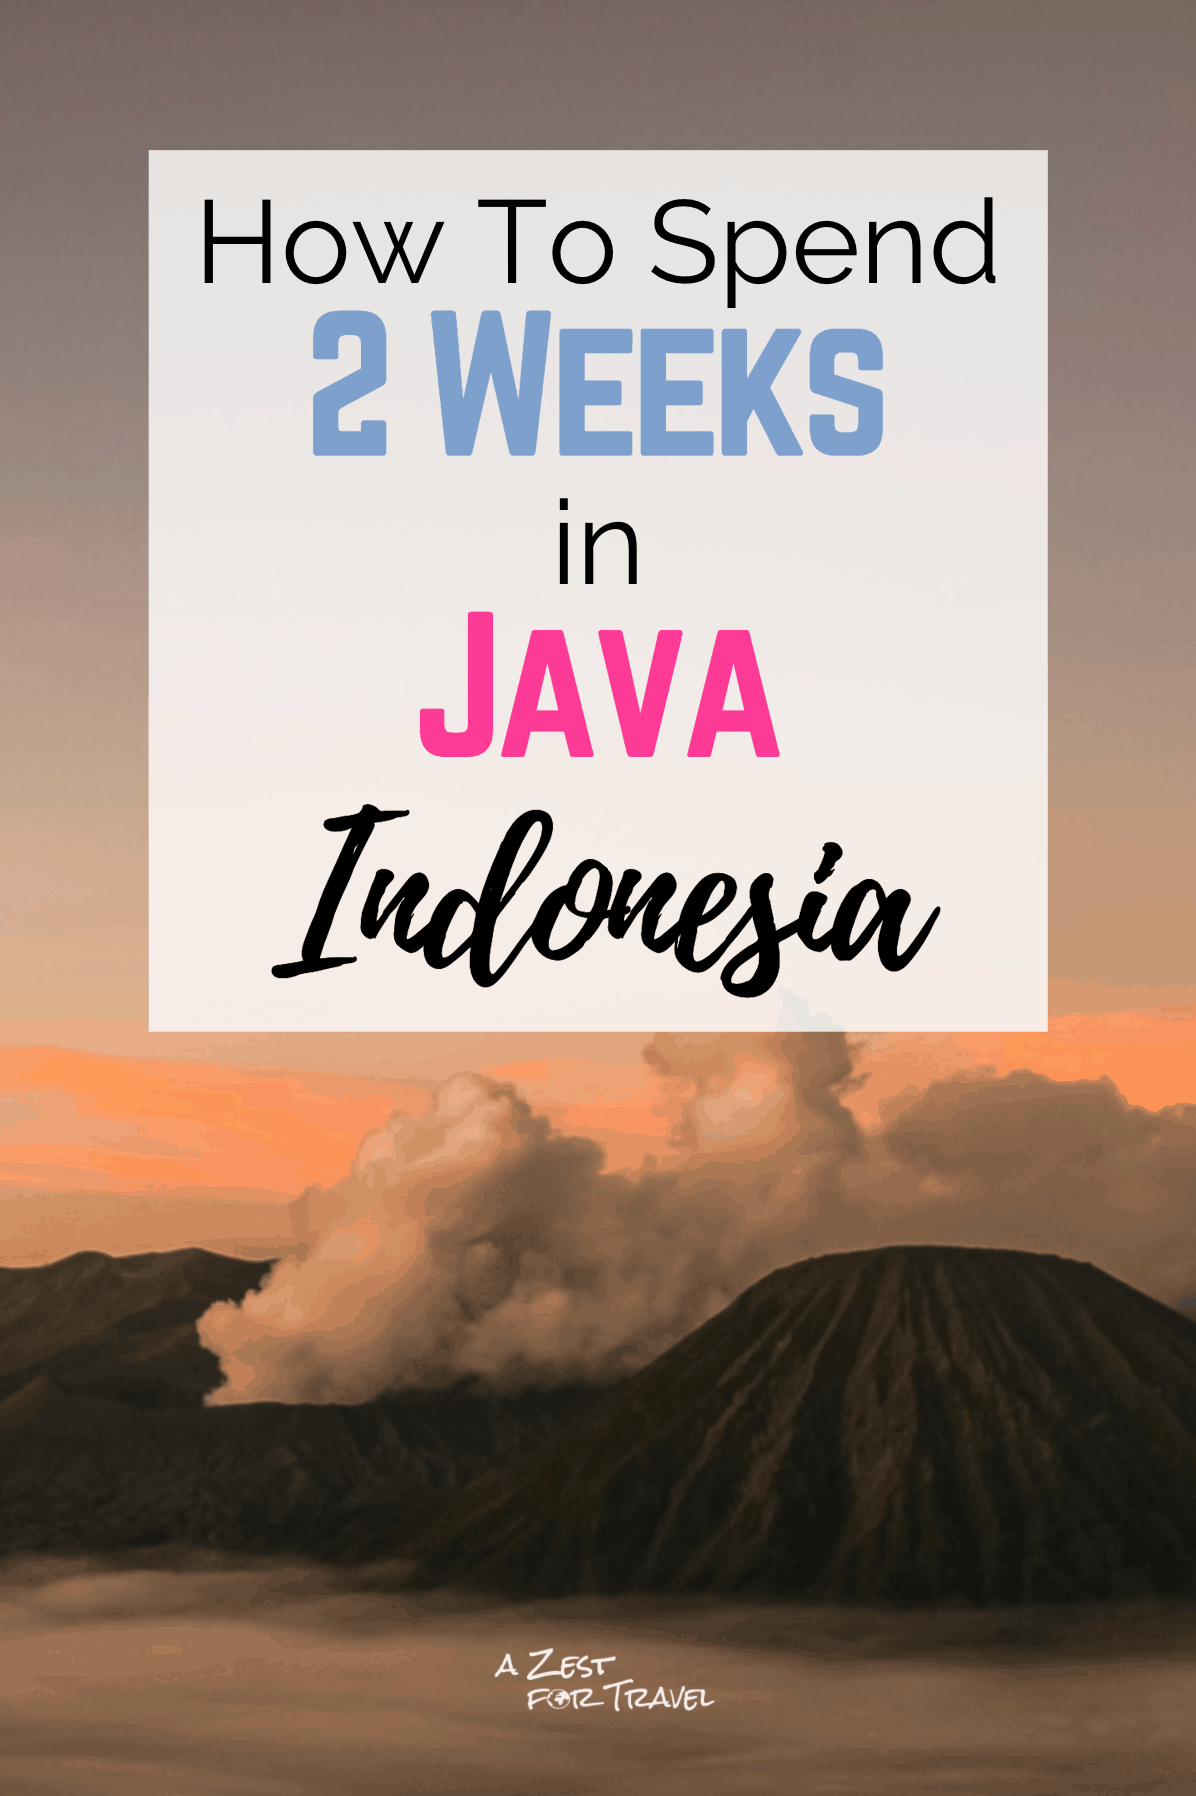 The perfect 2 week Java Indonesia travel itinerary. This Java travel guide takes in the best travel destinations on your route from West Java to East Java, including Yogyakarta's incredible Prambanan and Borobudur temples in Central Java, spectacular sunrise at volcanoes like Mount Bromo and Ijen, all the while experiencing Indonesia's wonderful people and culture. This epic travel itinerary will show you the best places beyond Bali in Indonesia | A Zest For Travel | #javaindonesia #mountbromo